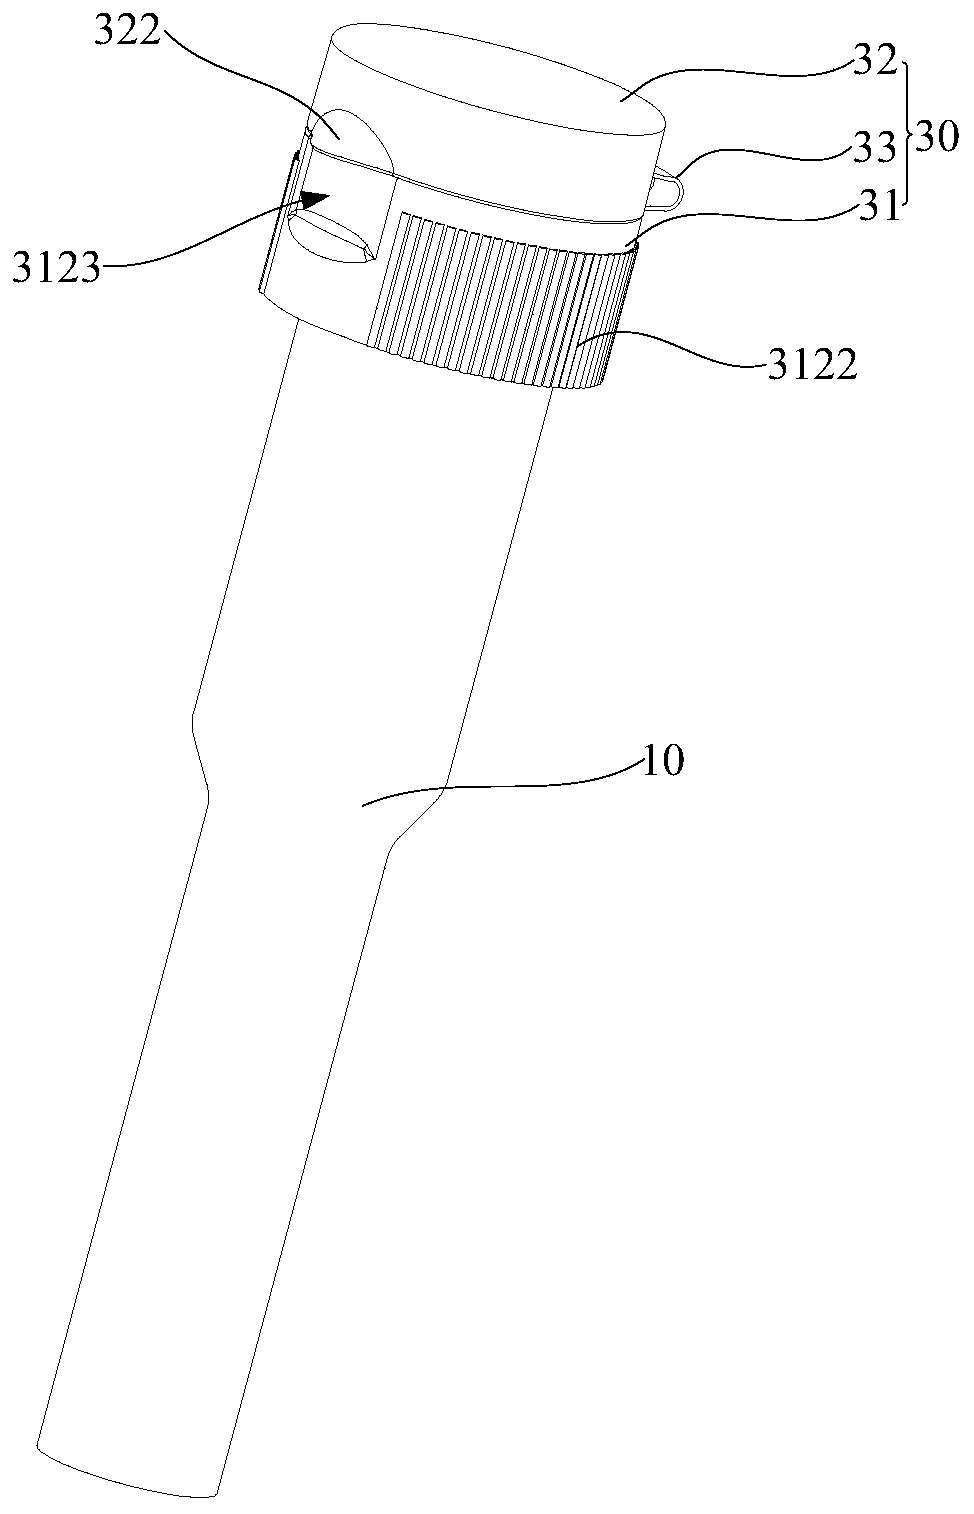 Body fluid collection device